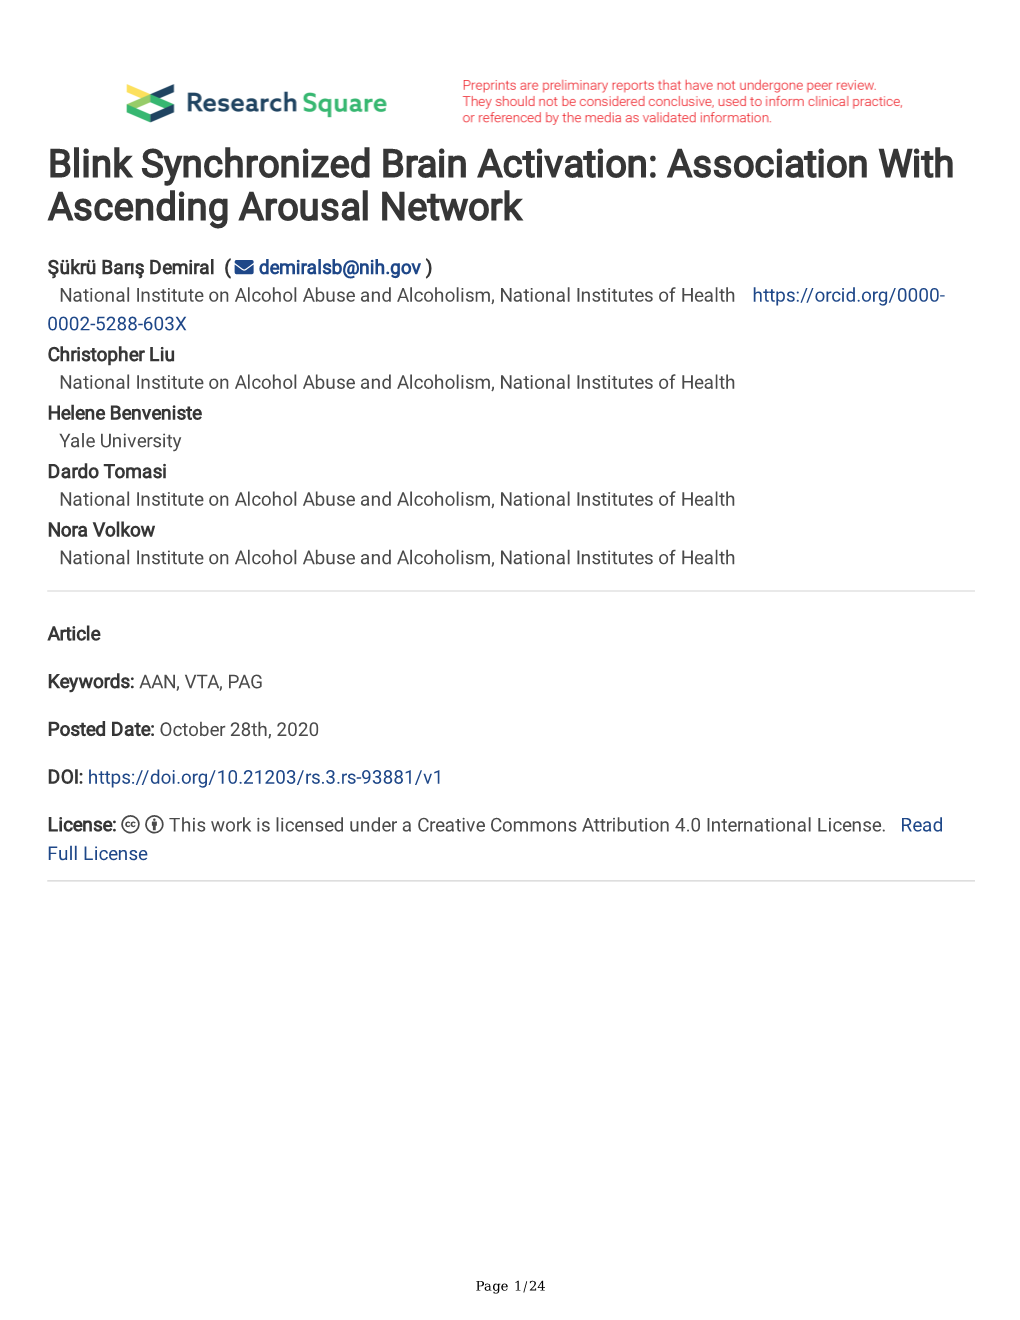 Blink Synchronized Brain Activation: Association with Ascending Arousal Network